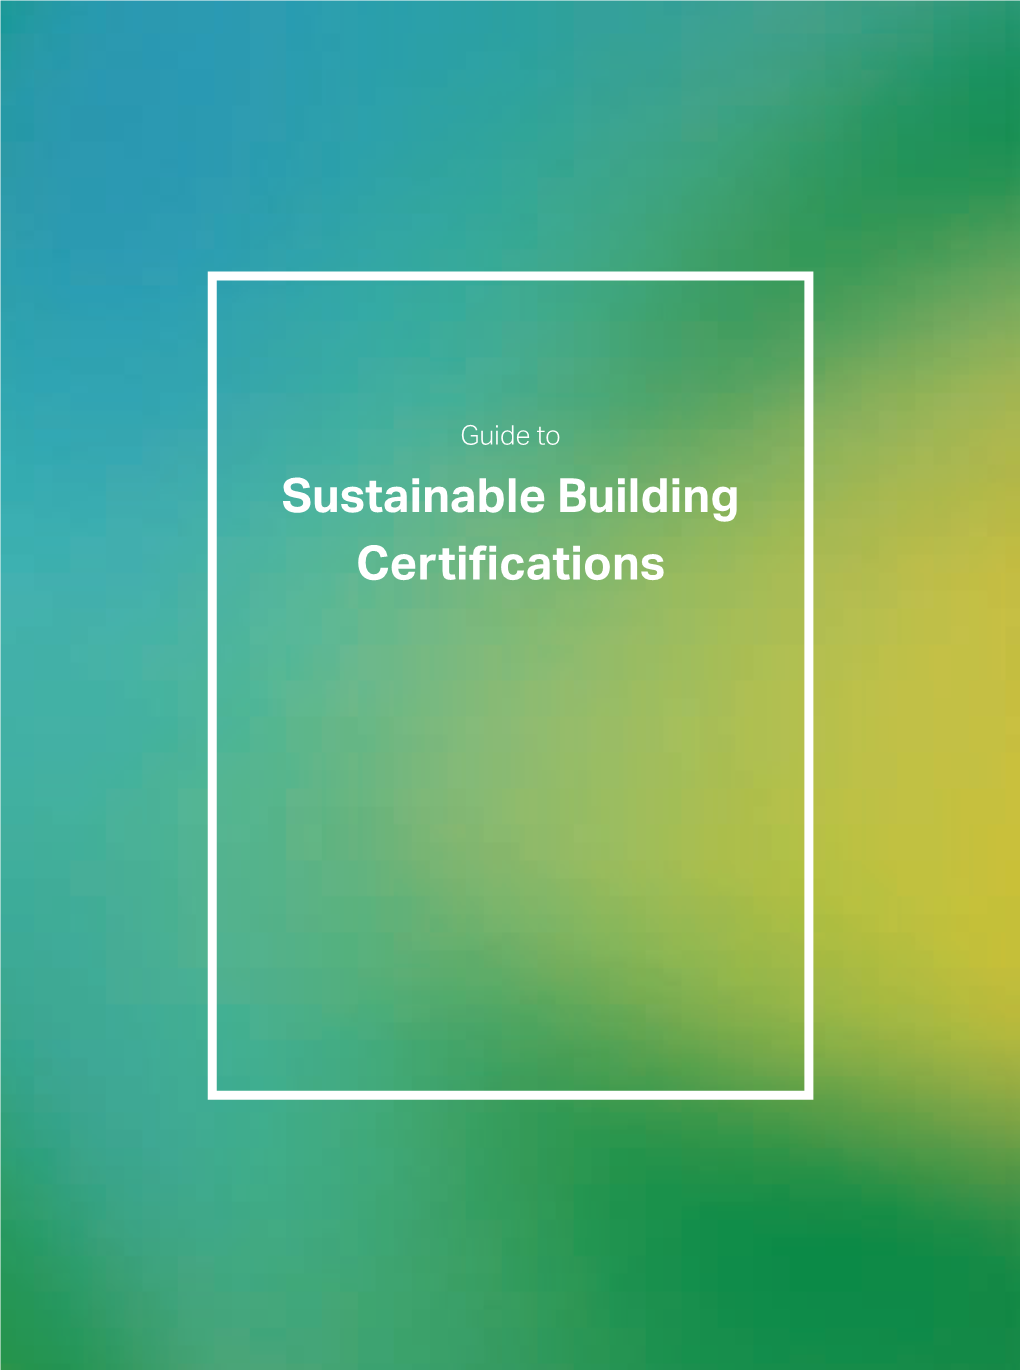 Guide to Sustainable Building Certifications